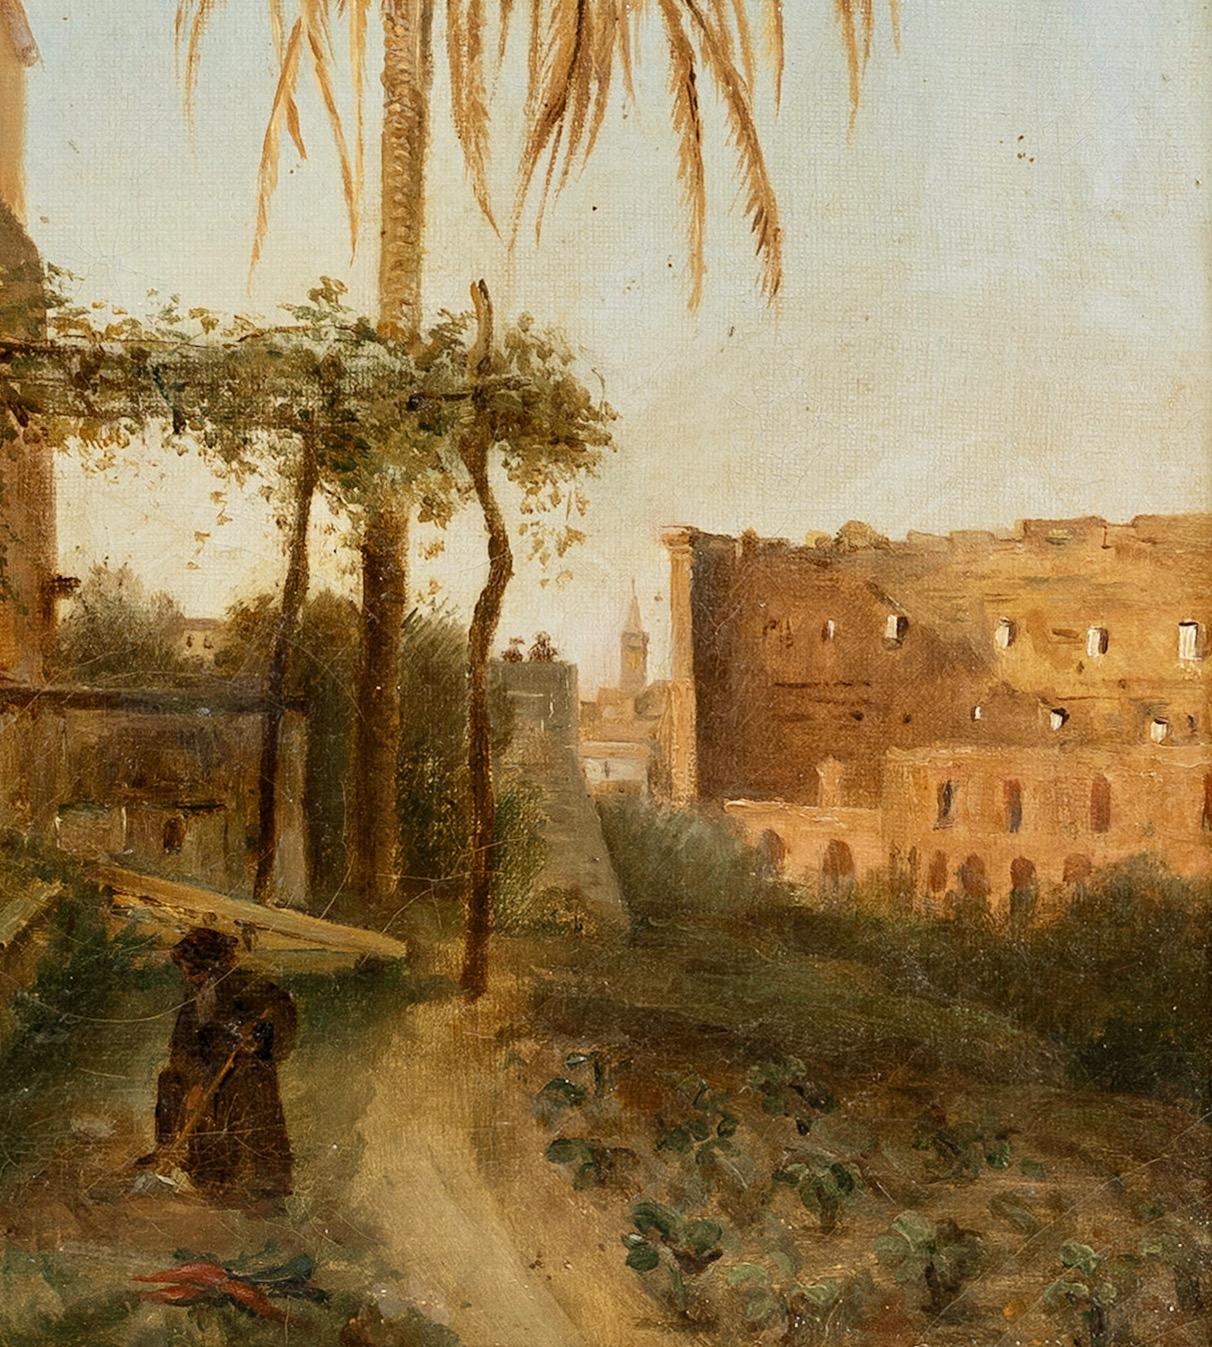 A view from Rome with the Church of San Bonaventura al Palatino, also called San Bonaventura alla Polveriera, and the Colosseum. In the distance is the church of Santa Maria Maggiore. In front of the view is a Franciscan monk working the garden of